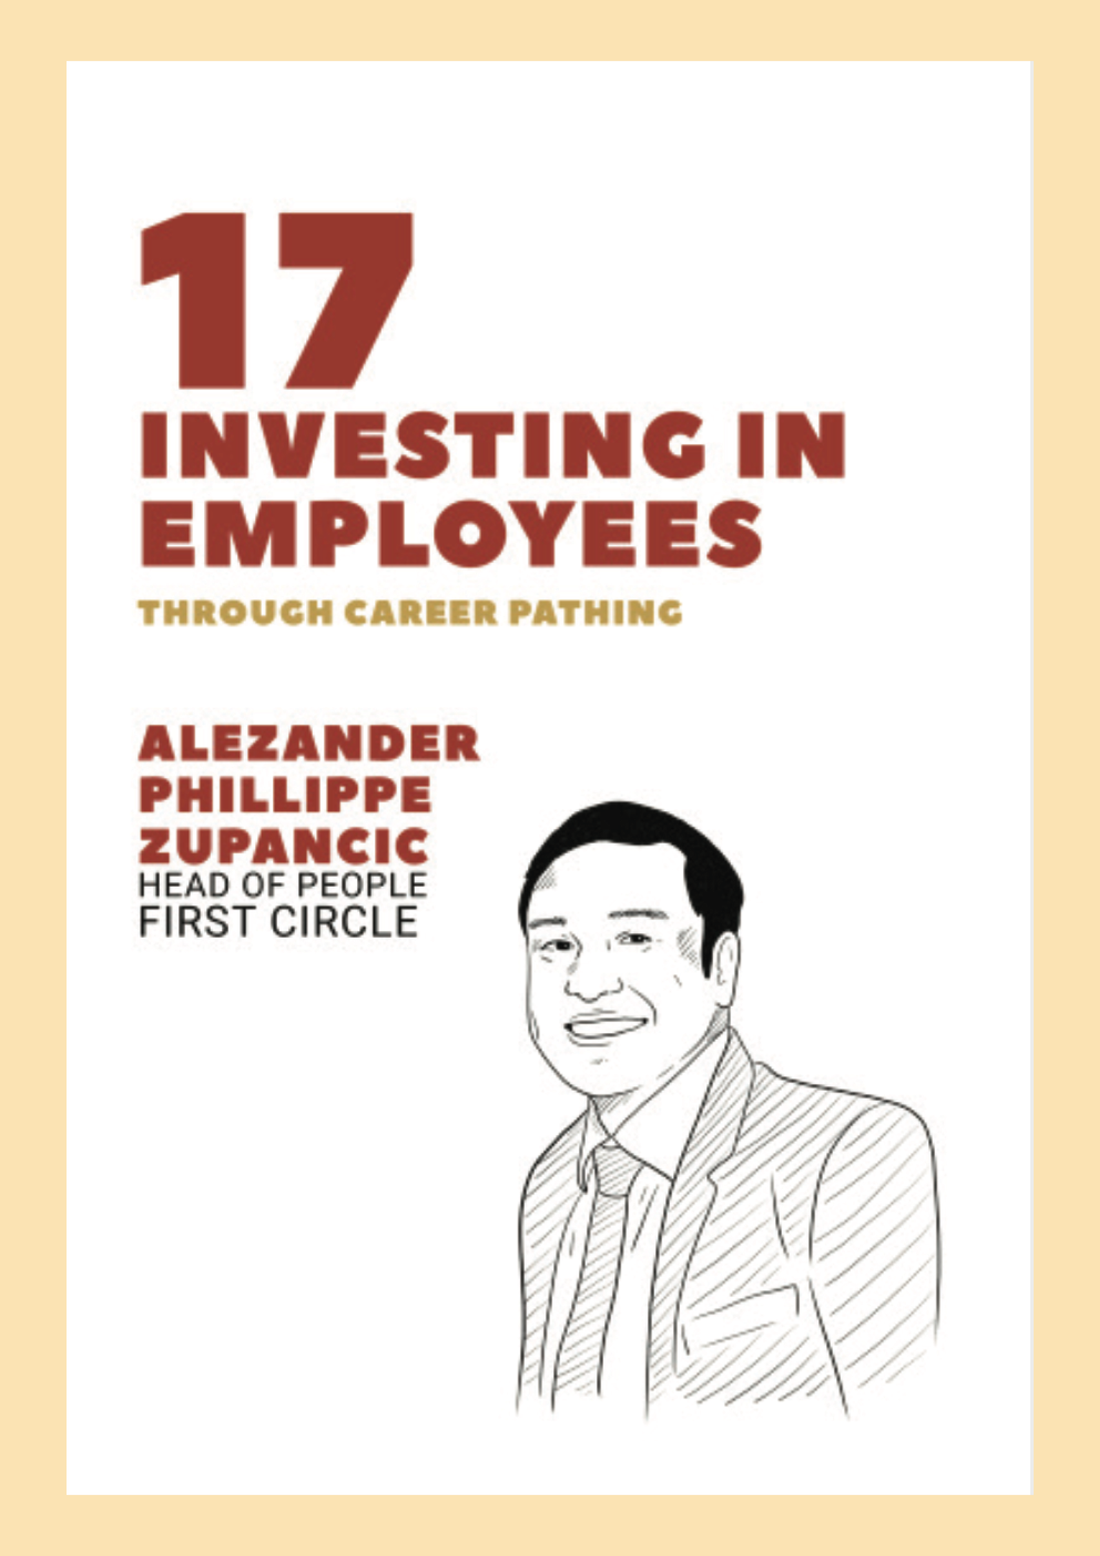 Investing in Employees Through Career Pathing